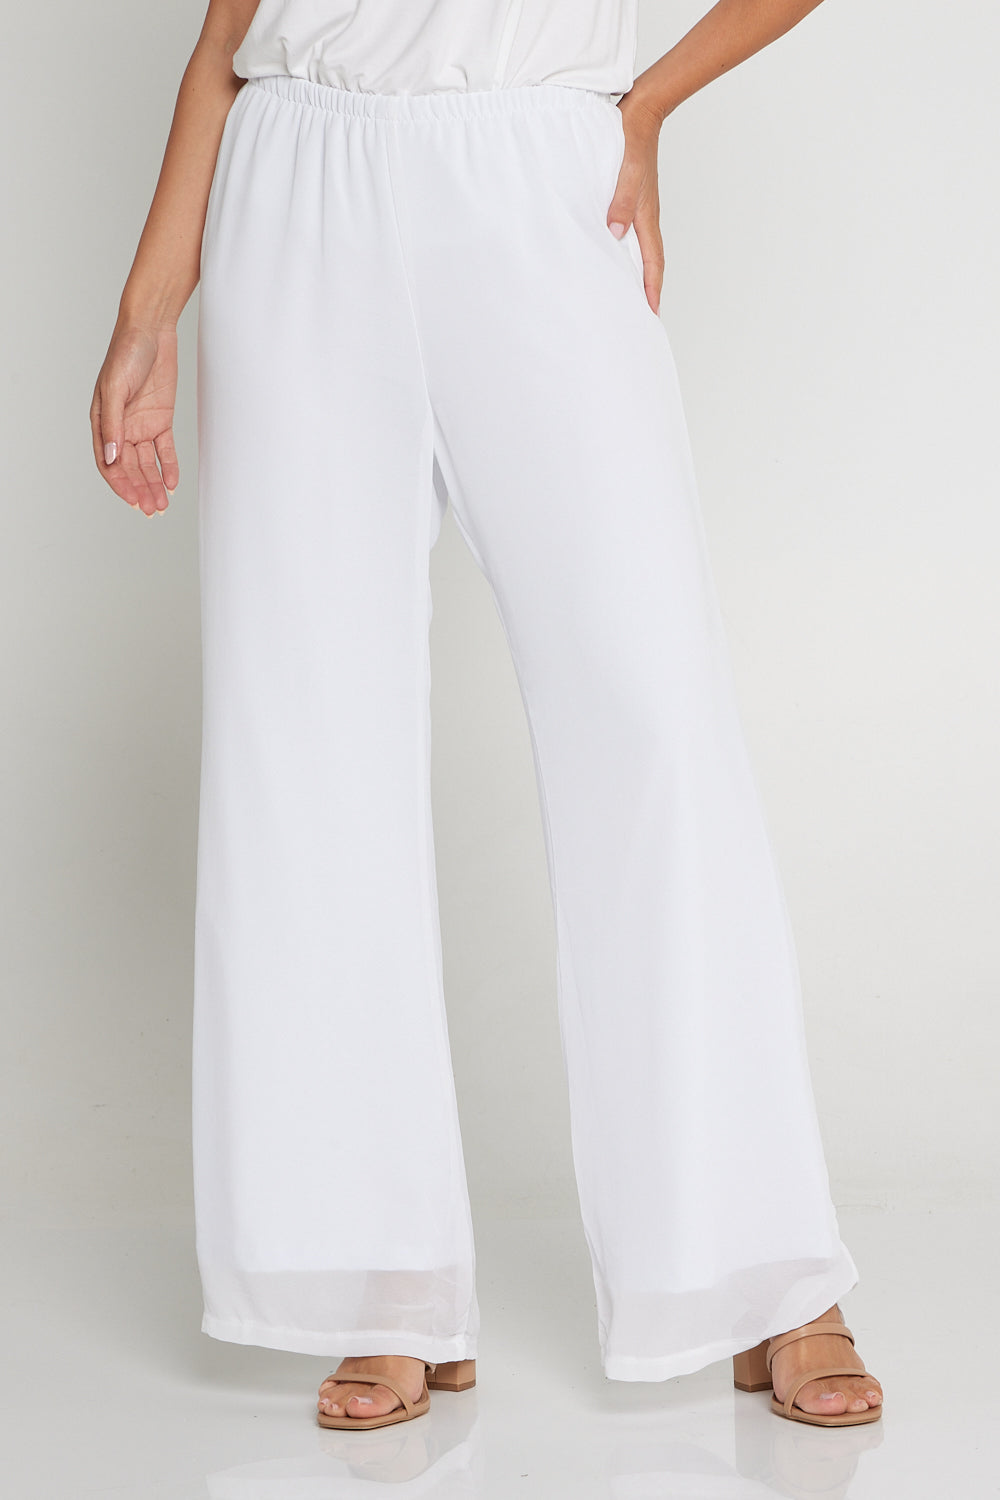 Eve Pants White  White flare pants, White party outfit, Night outfits